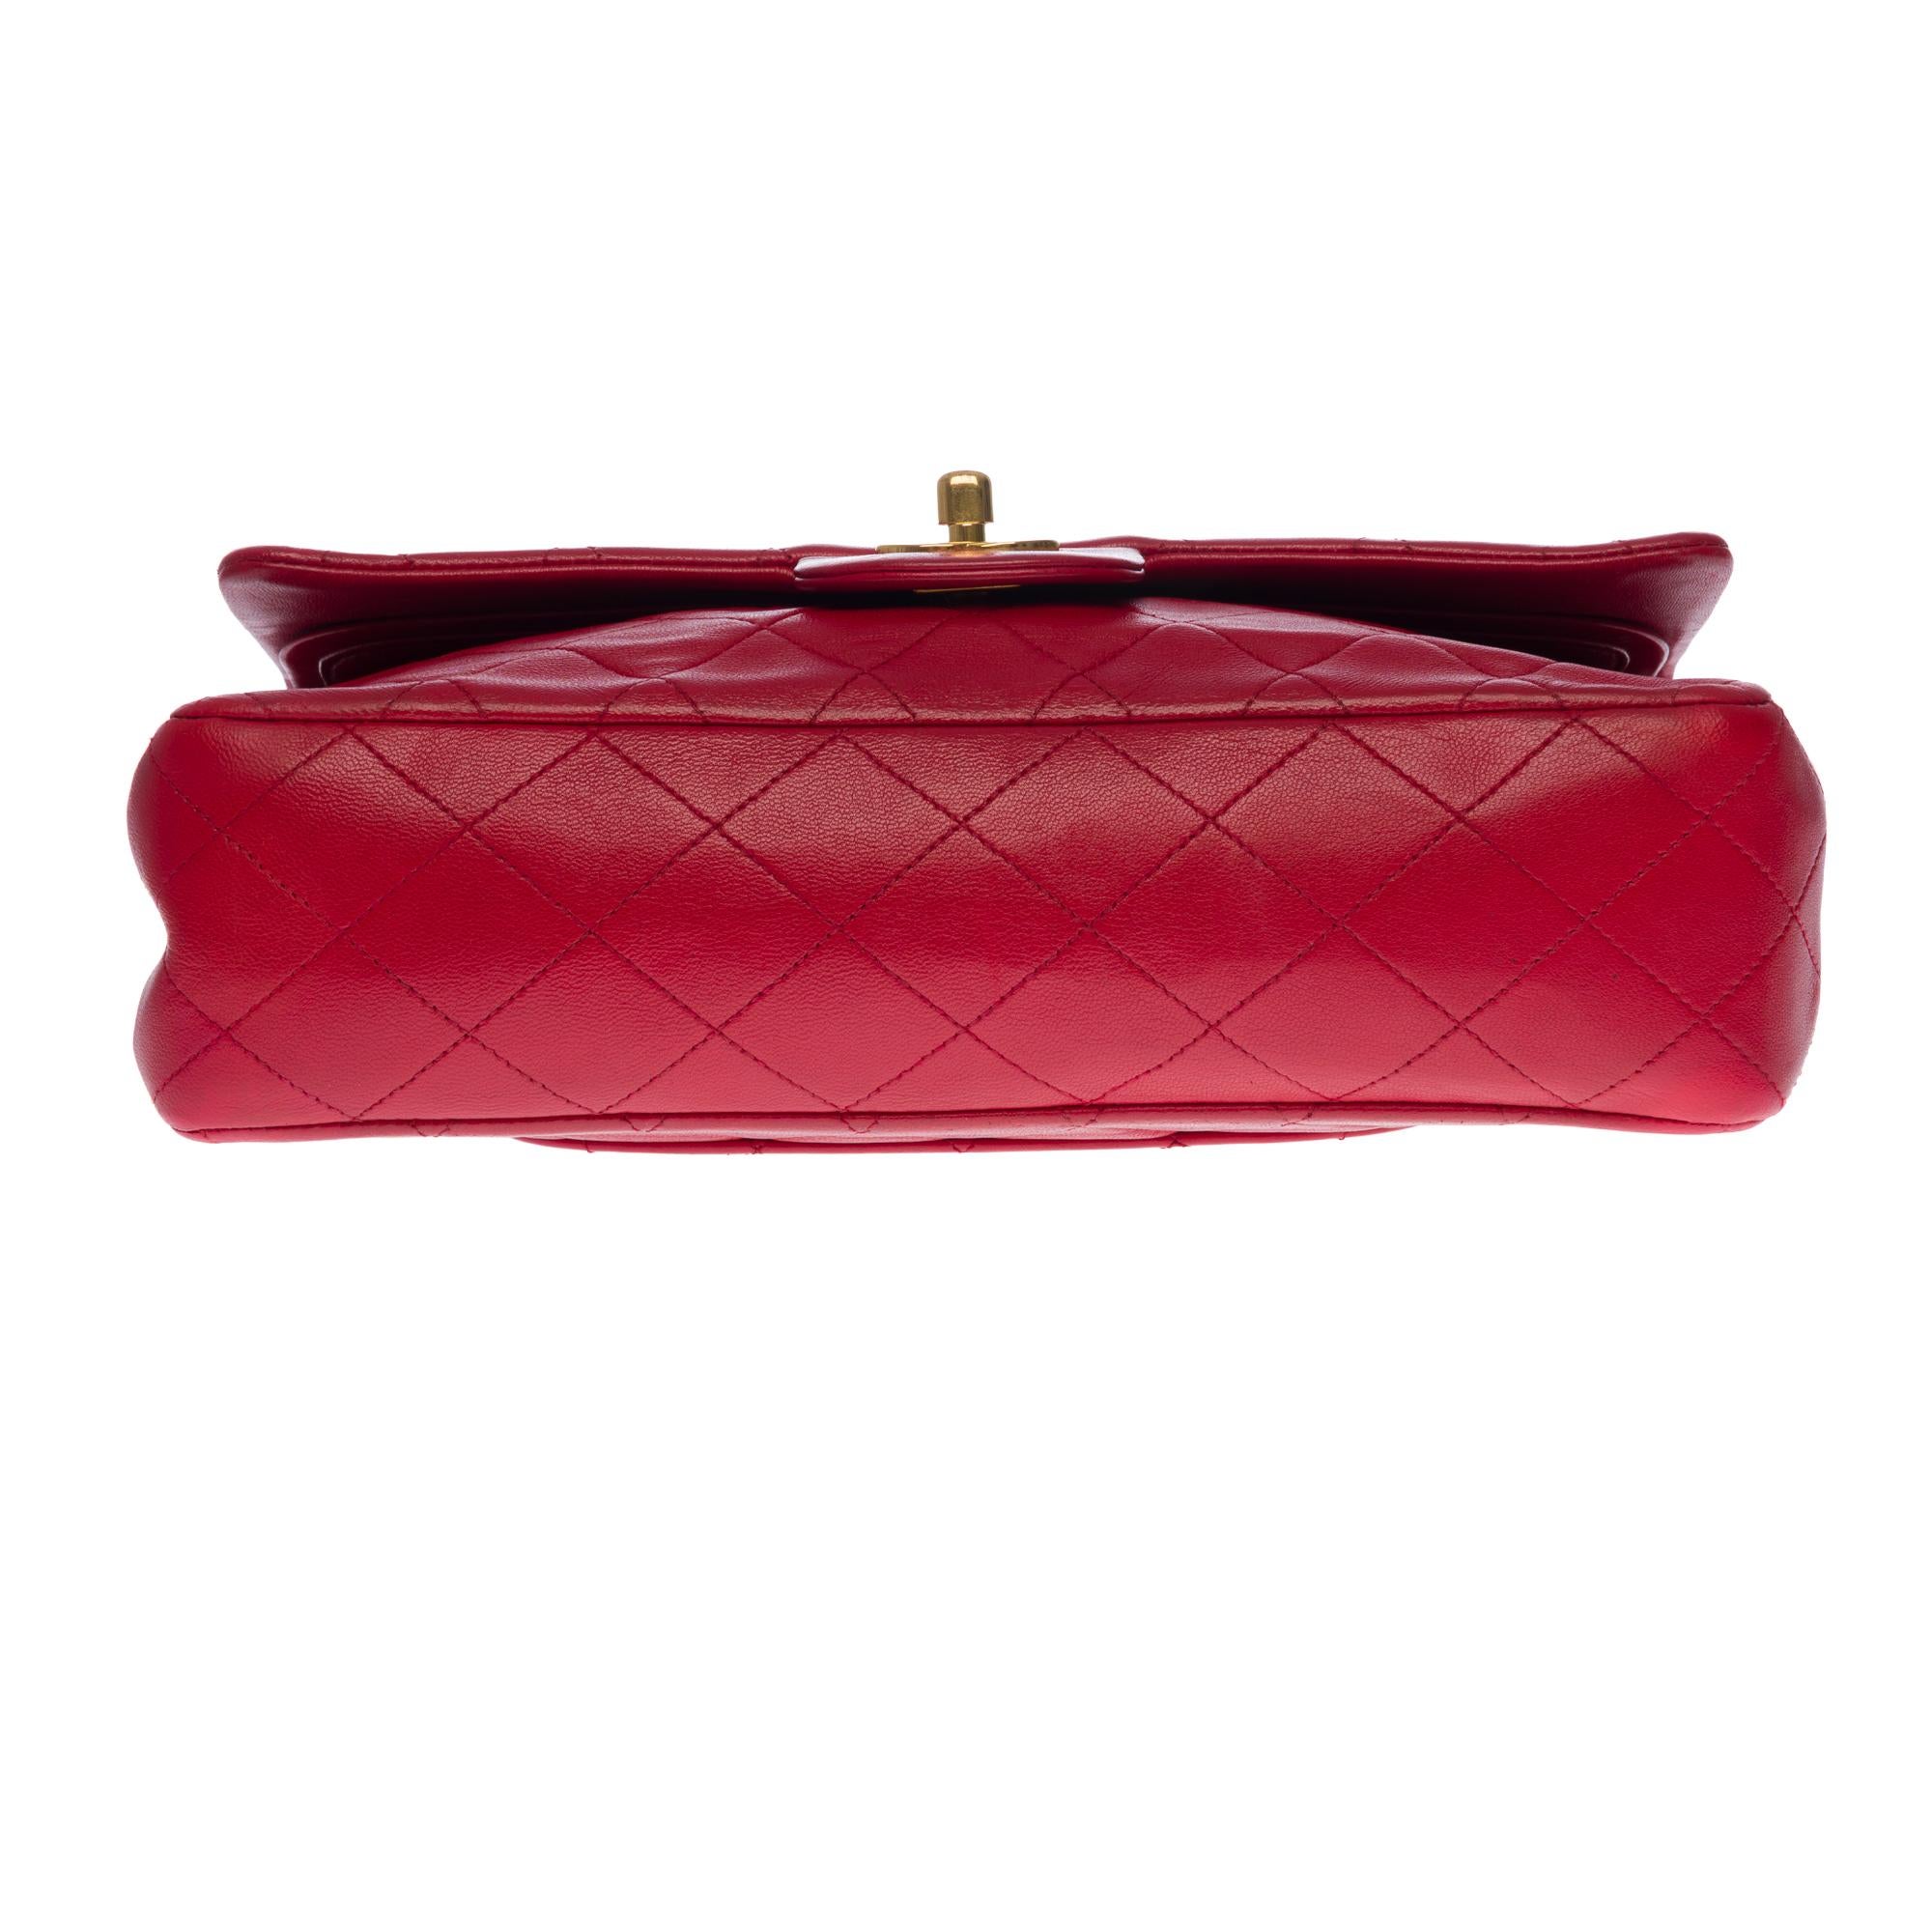 Chanel Timeless Medium double flap Shoulder bag in Red quilted leather, GHW 5